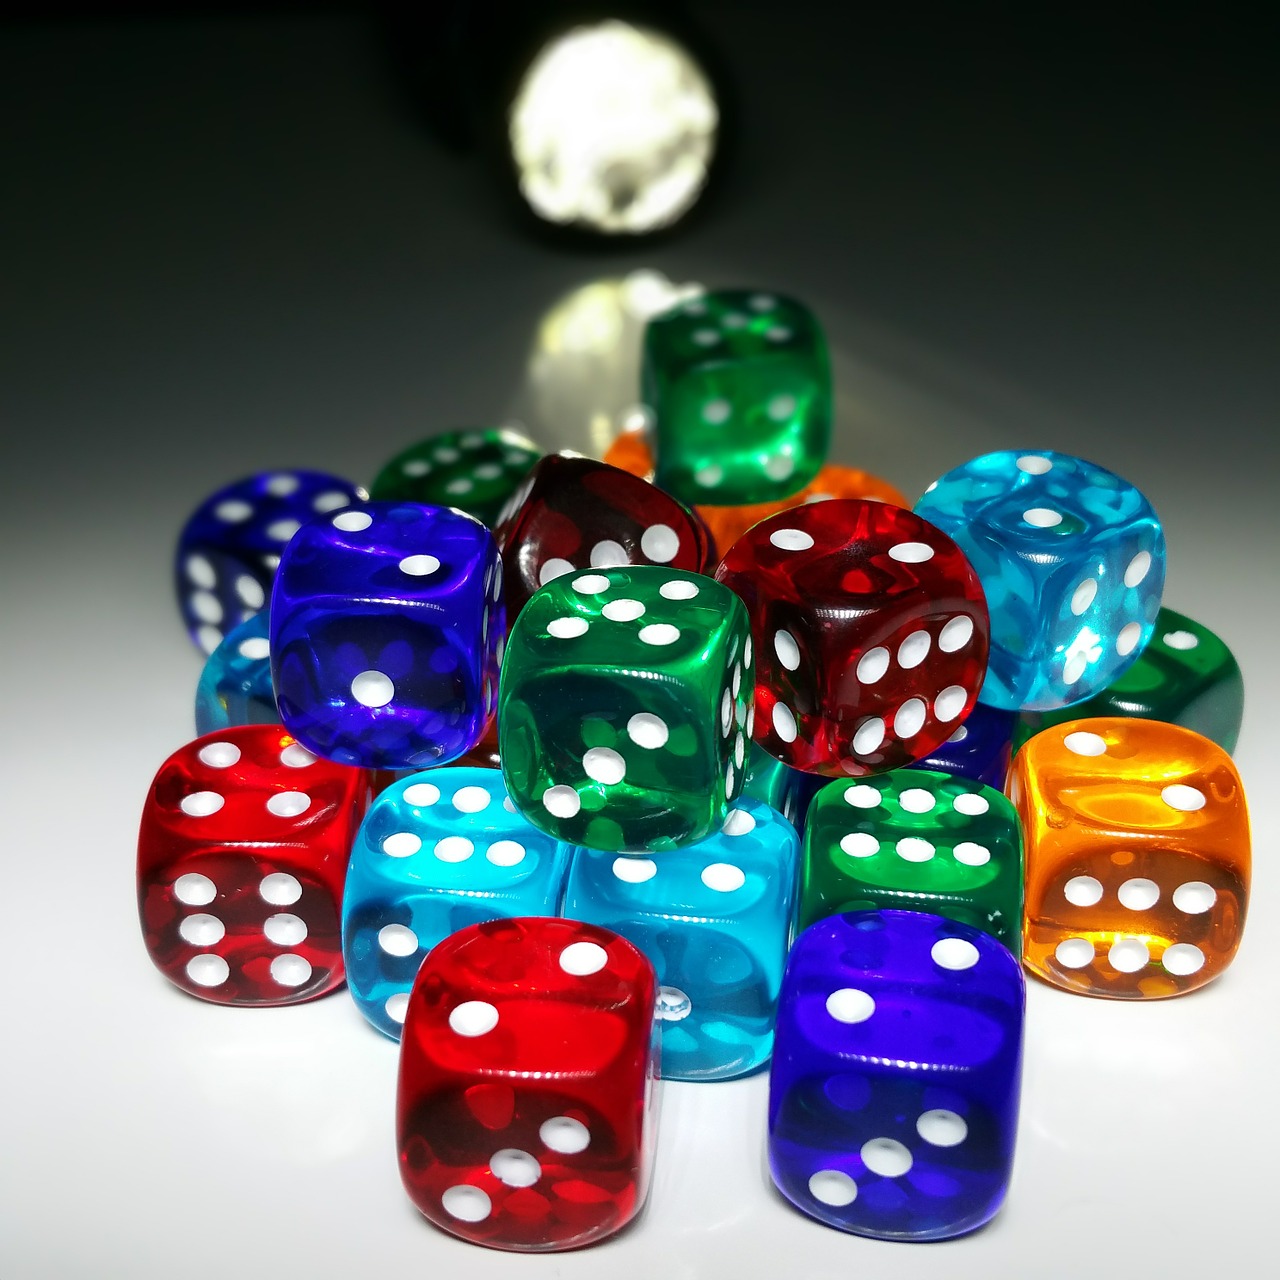 cube luck lucky dice free photo